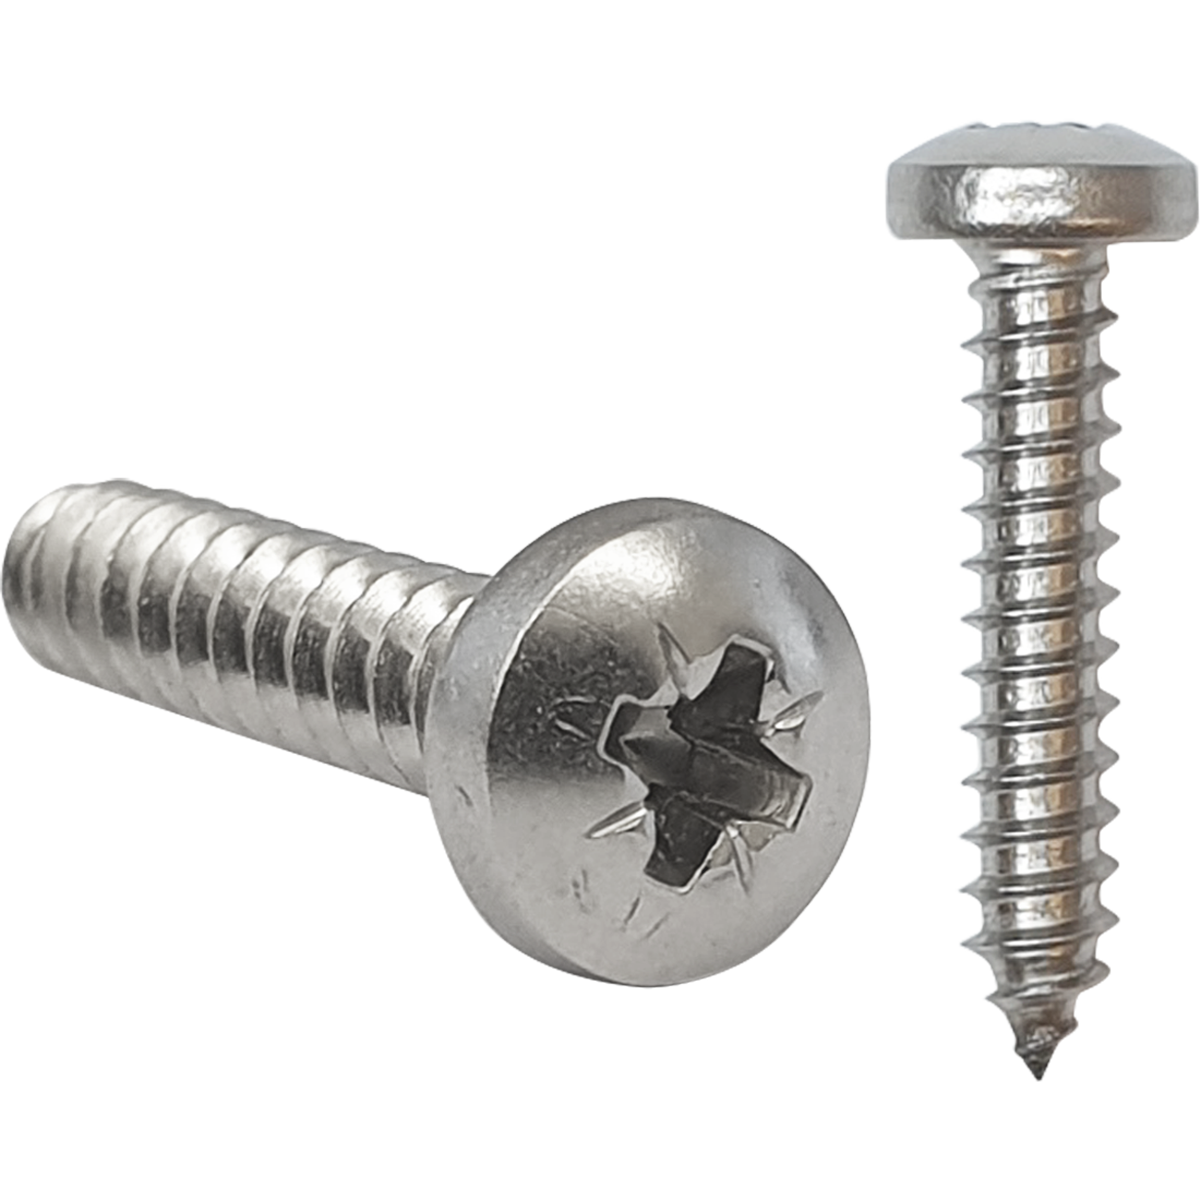 A2 stainless steel pan head self tapping screws are available at great prices and in a variety of diameters